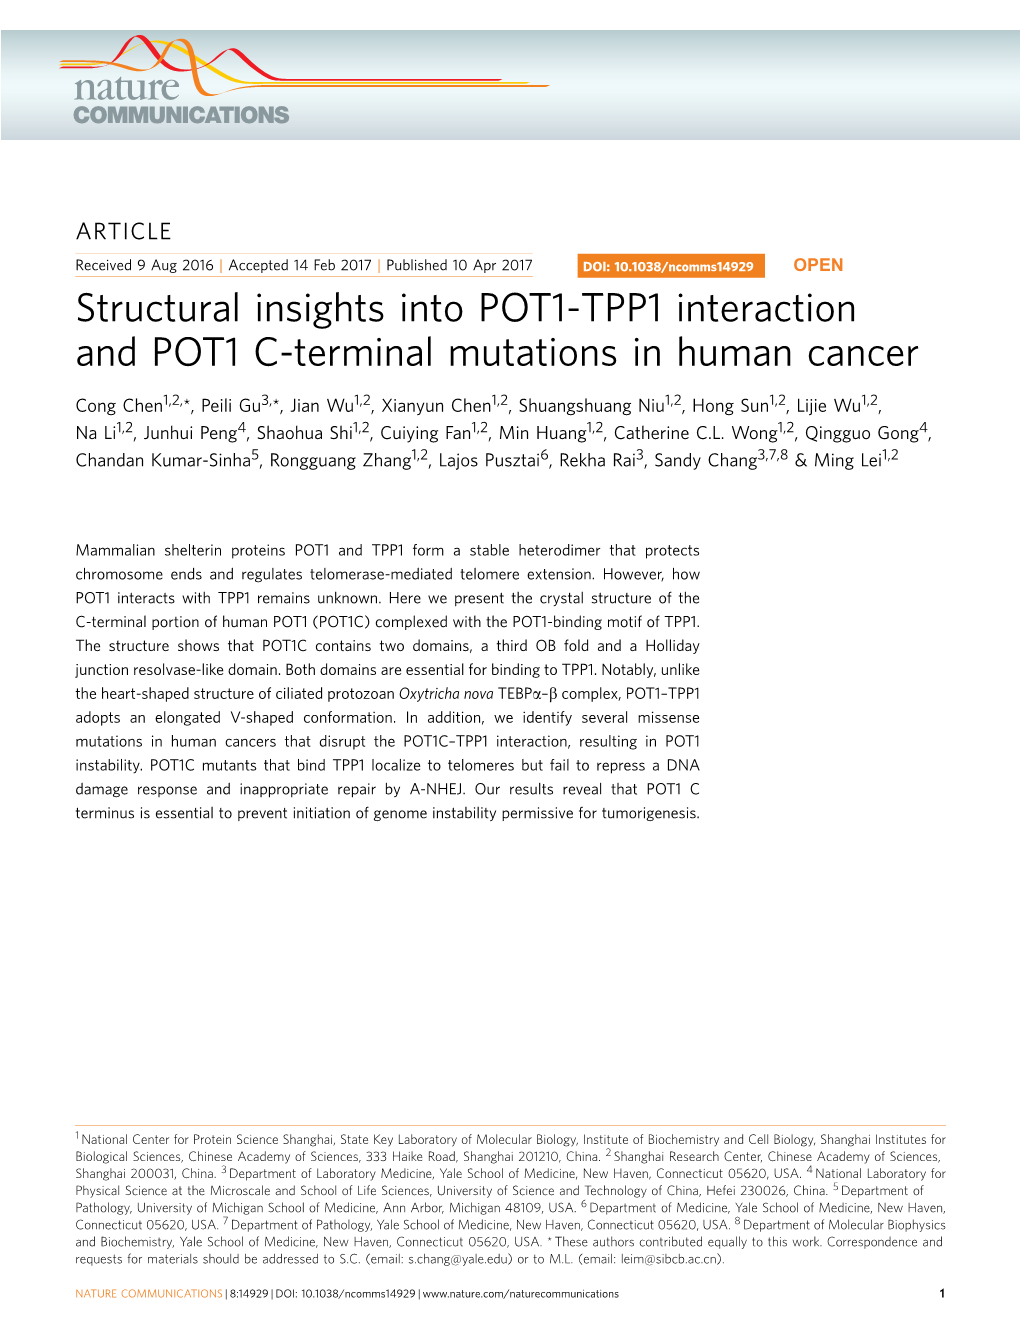 Structural Insights Into POT1-TPP1 Interaction and POT1 C-Terminal Mutations in Human Cancer